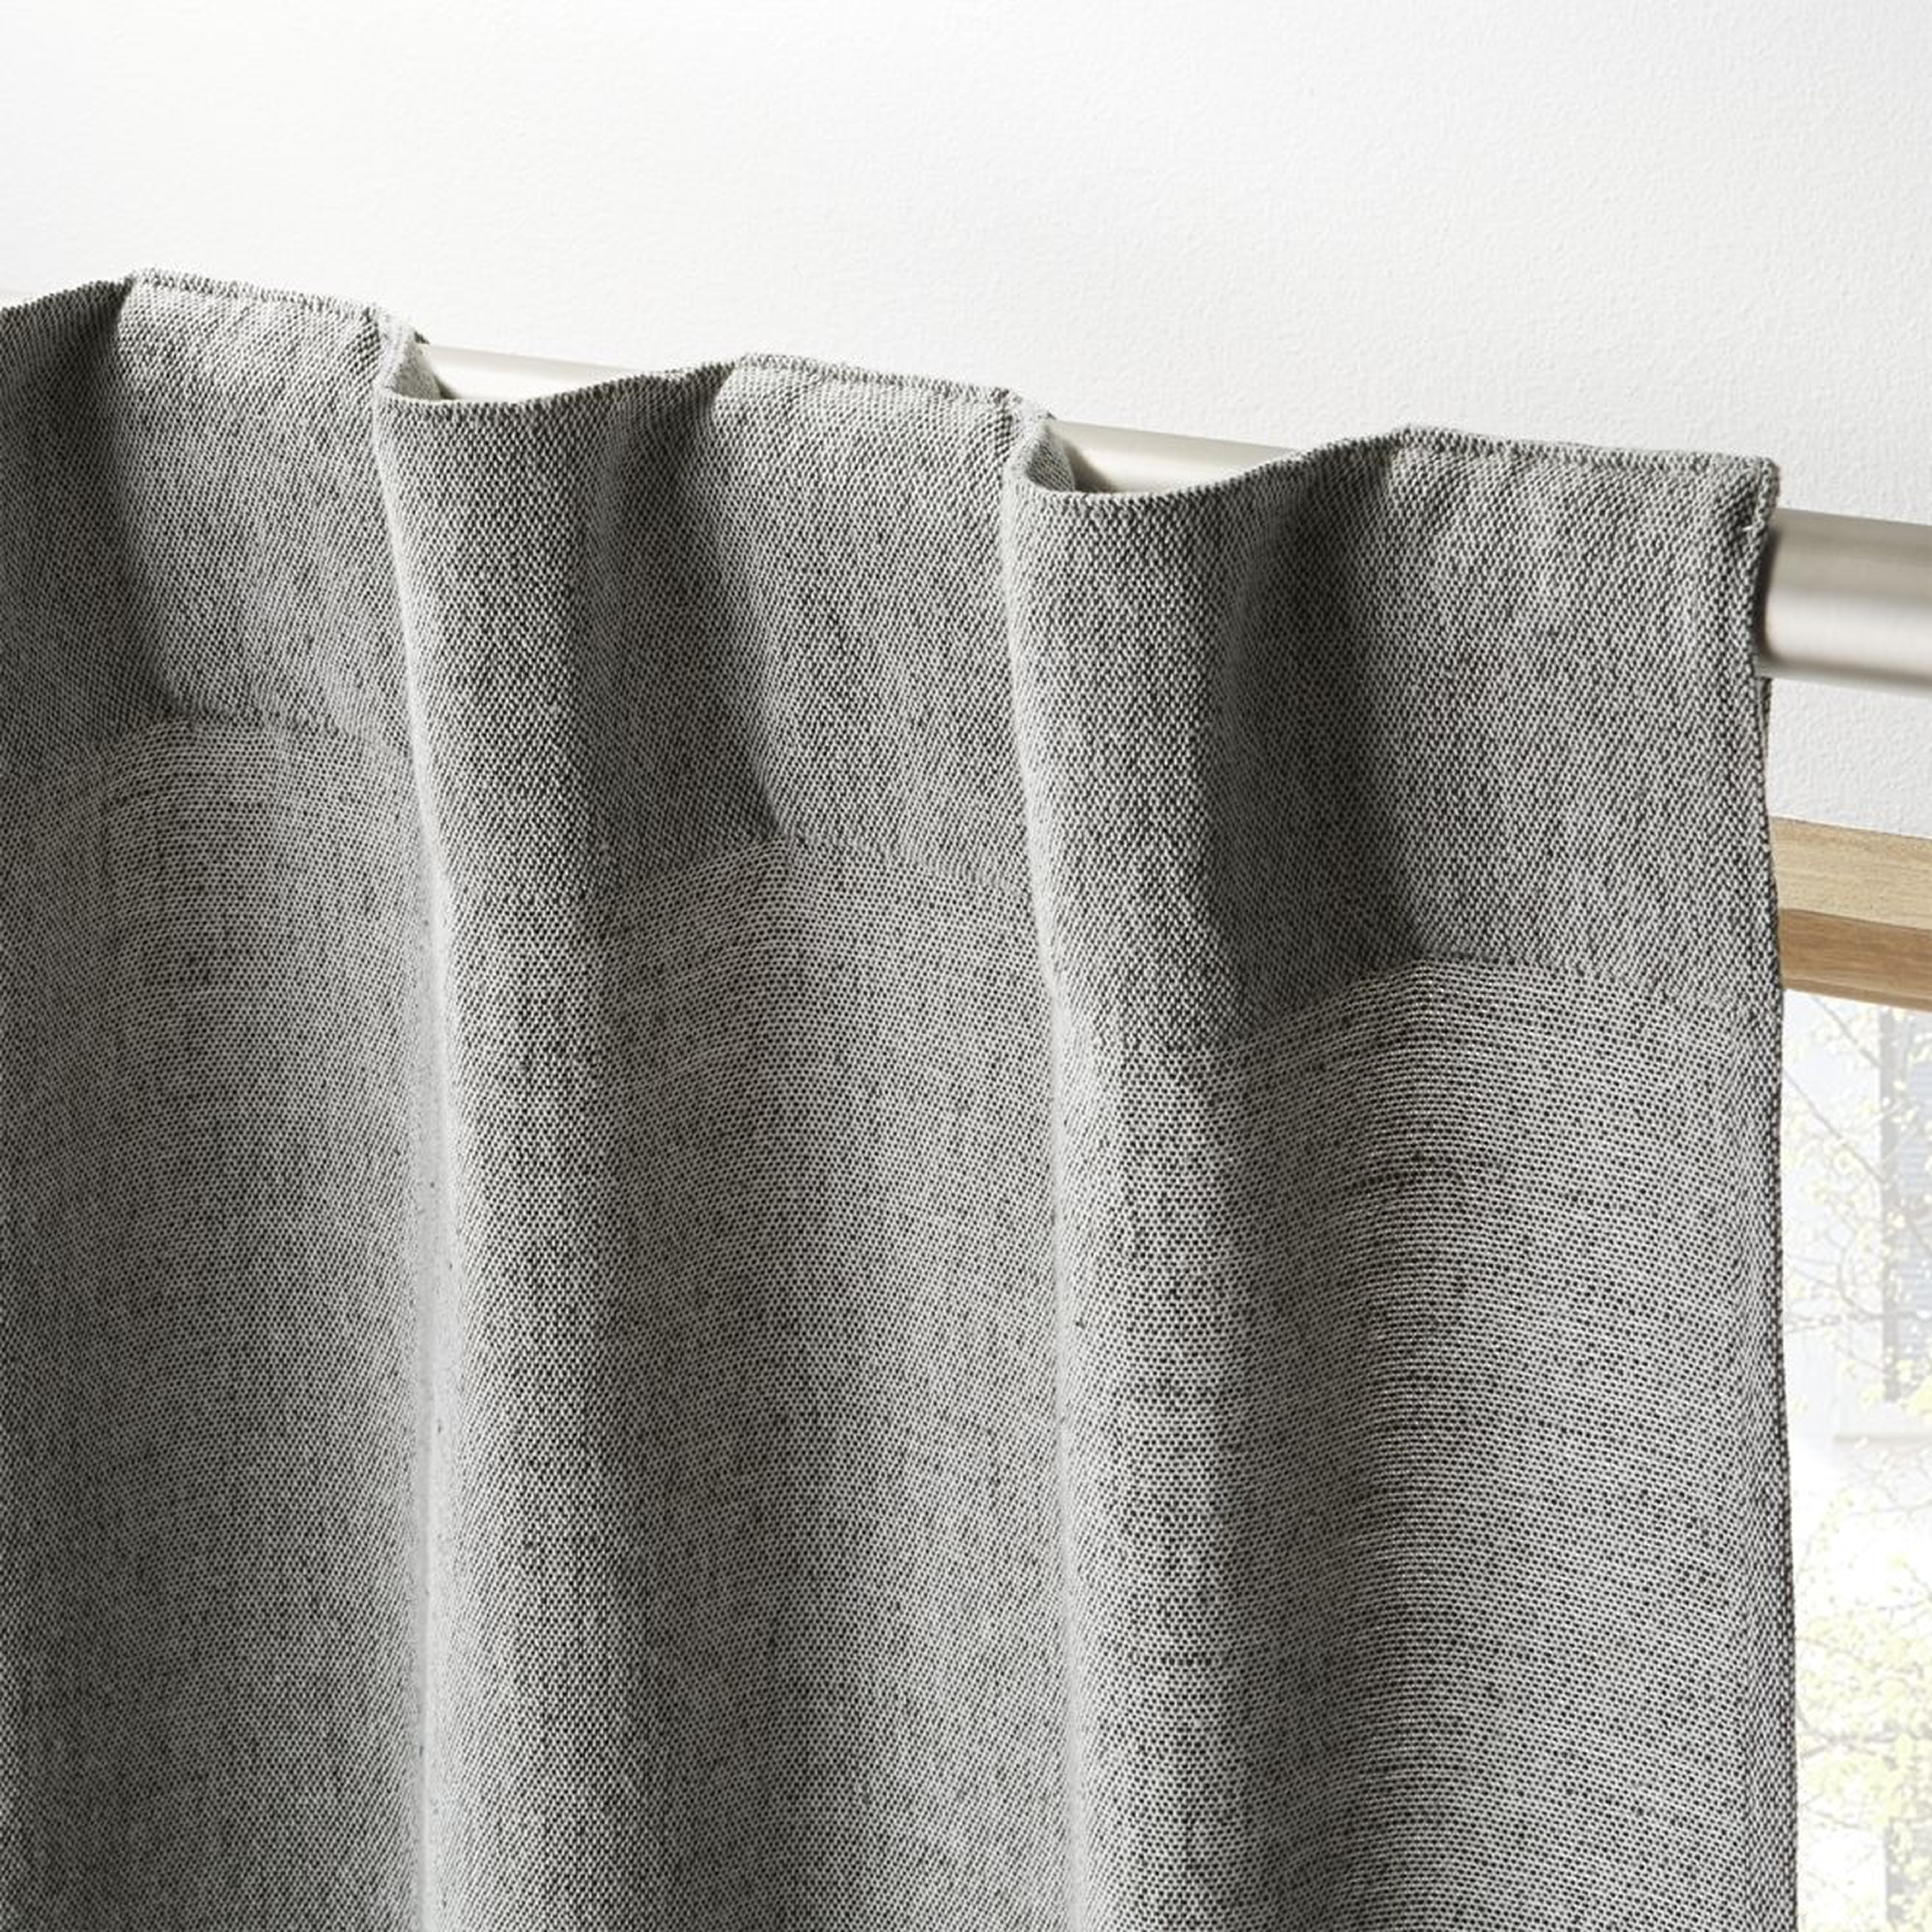 "Weekendr Graphite Grey Chambray Curtain Panel 48""x96""" - CB2